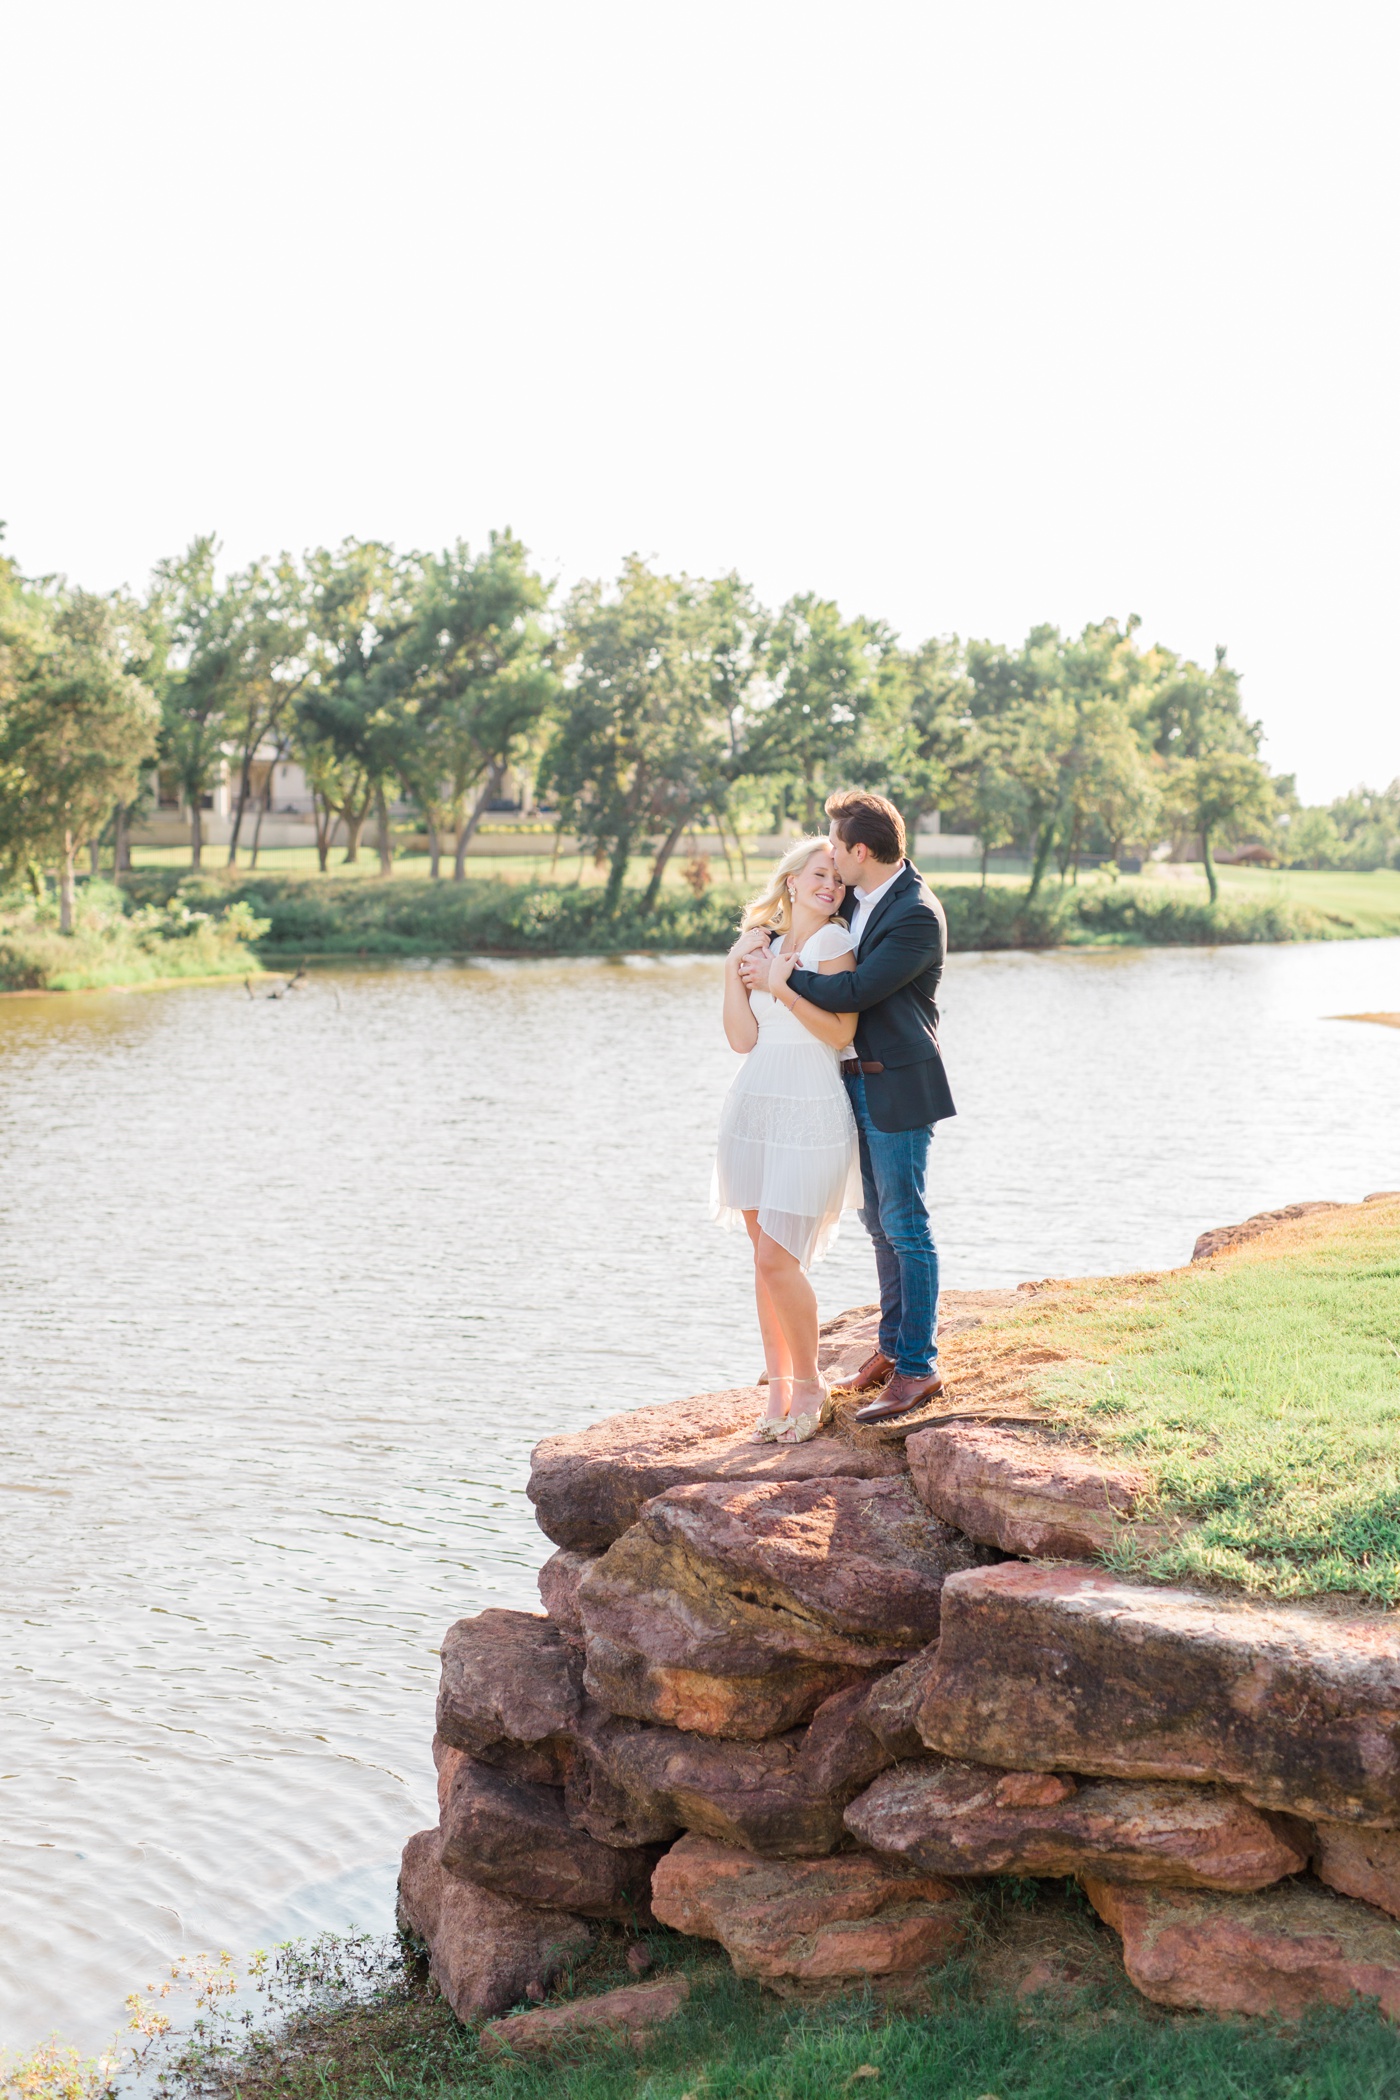 Formal engagement session with a bride in a white dress and gold heels